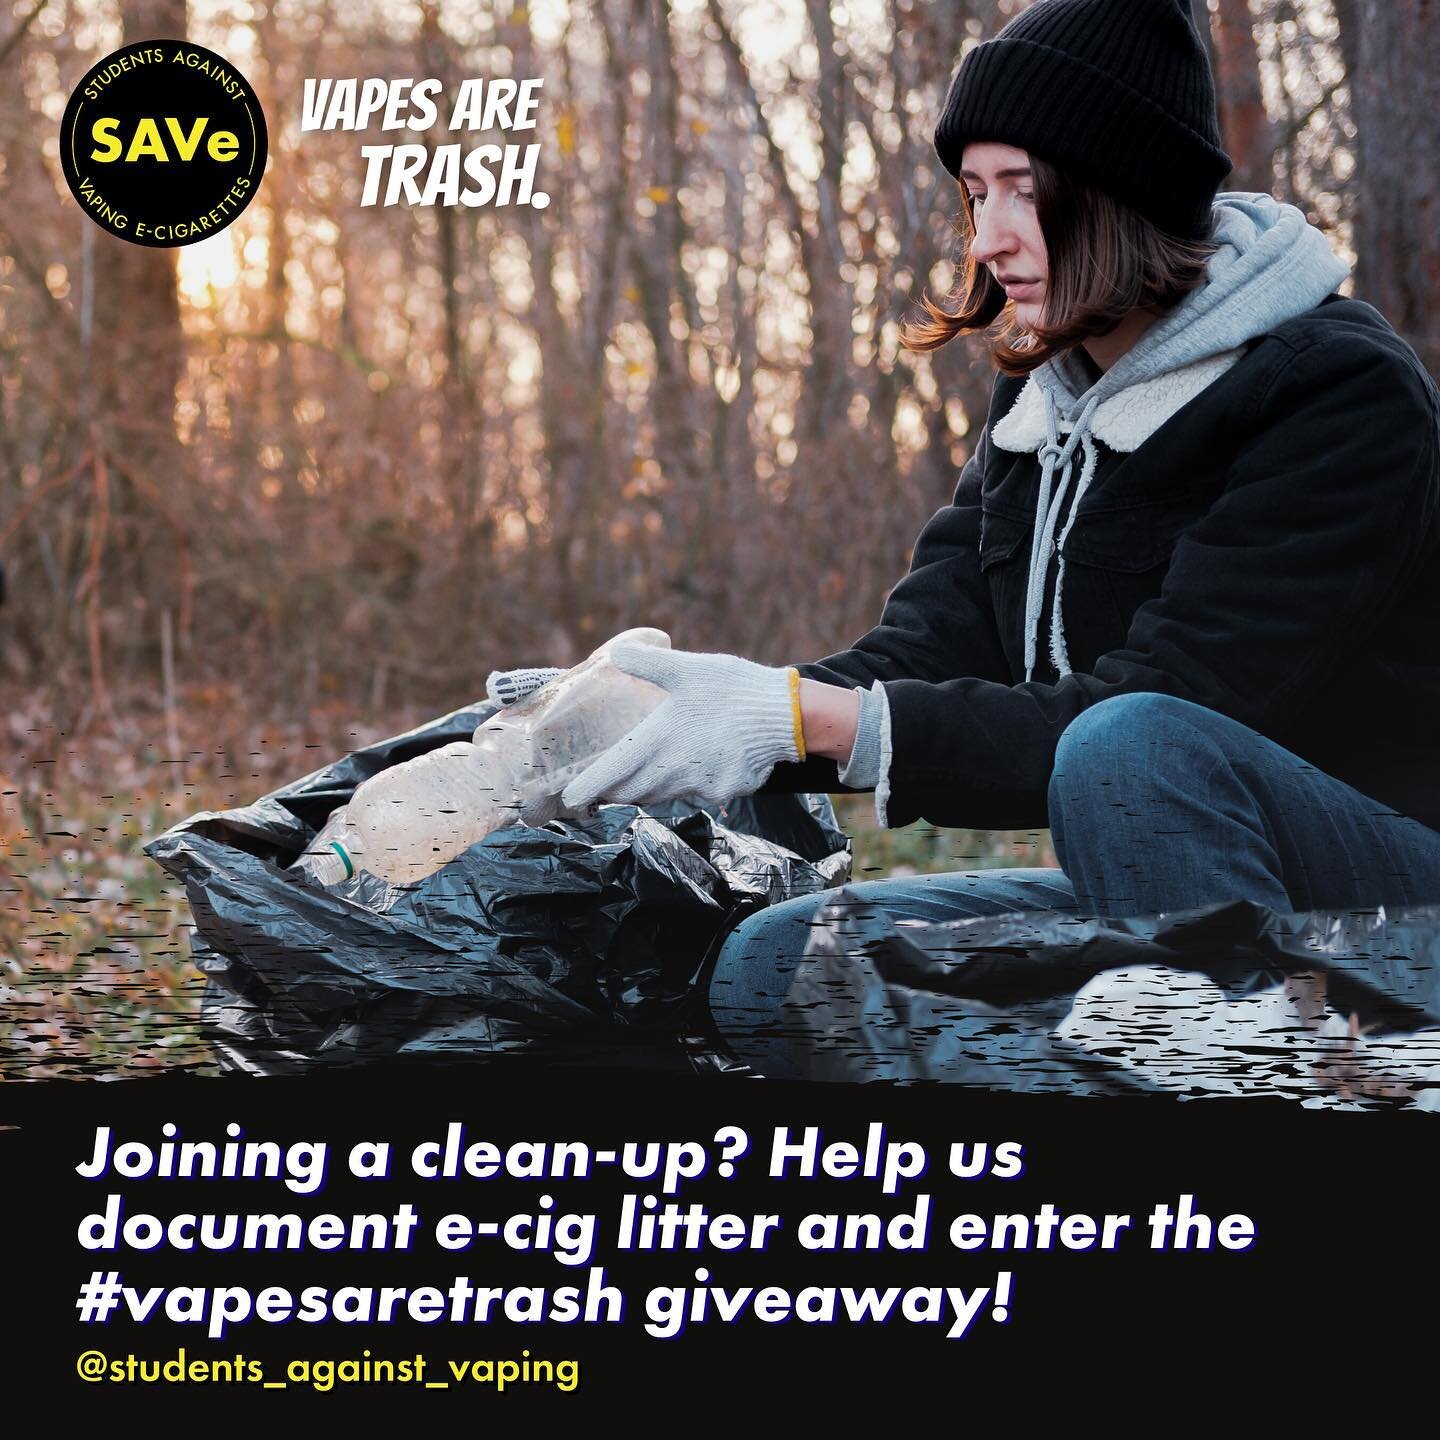 Take advantage of volunteering by documenting vape litter and entering our #vapesaretrash giveaway for a prize from @naeco! E-cigarettes are horrible for the #environment, not only containing #plastics, but lithium-ion batteries, heavy metals, and ha